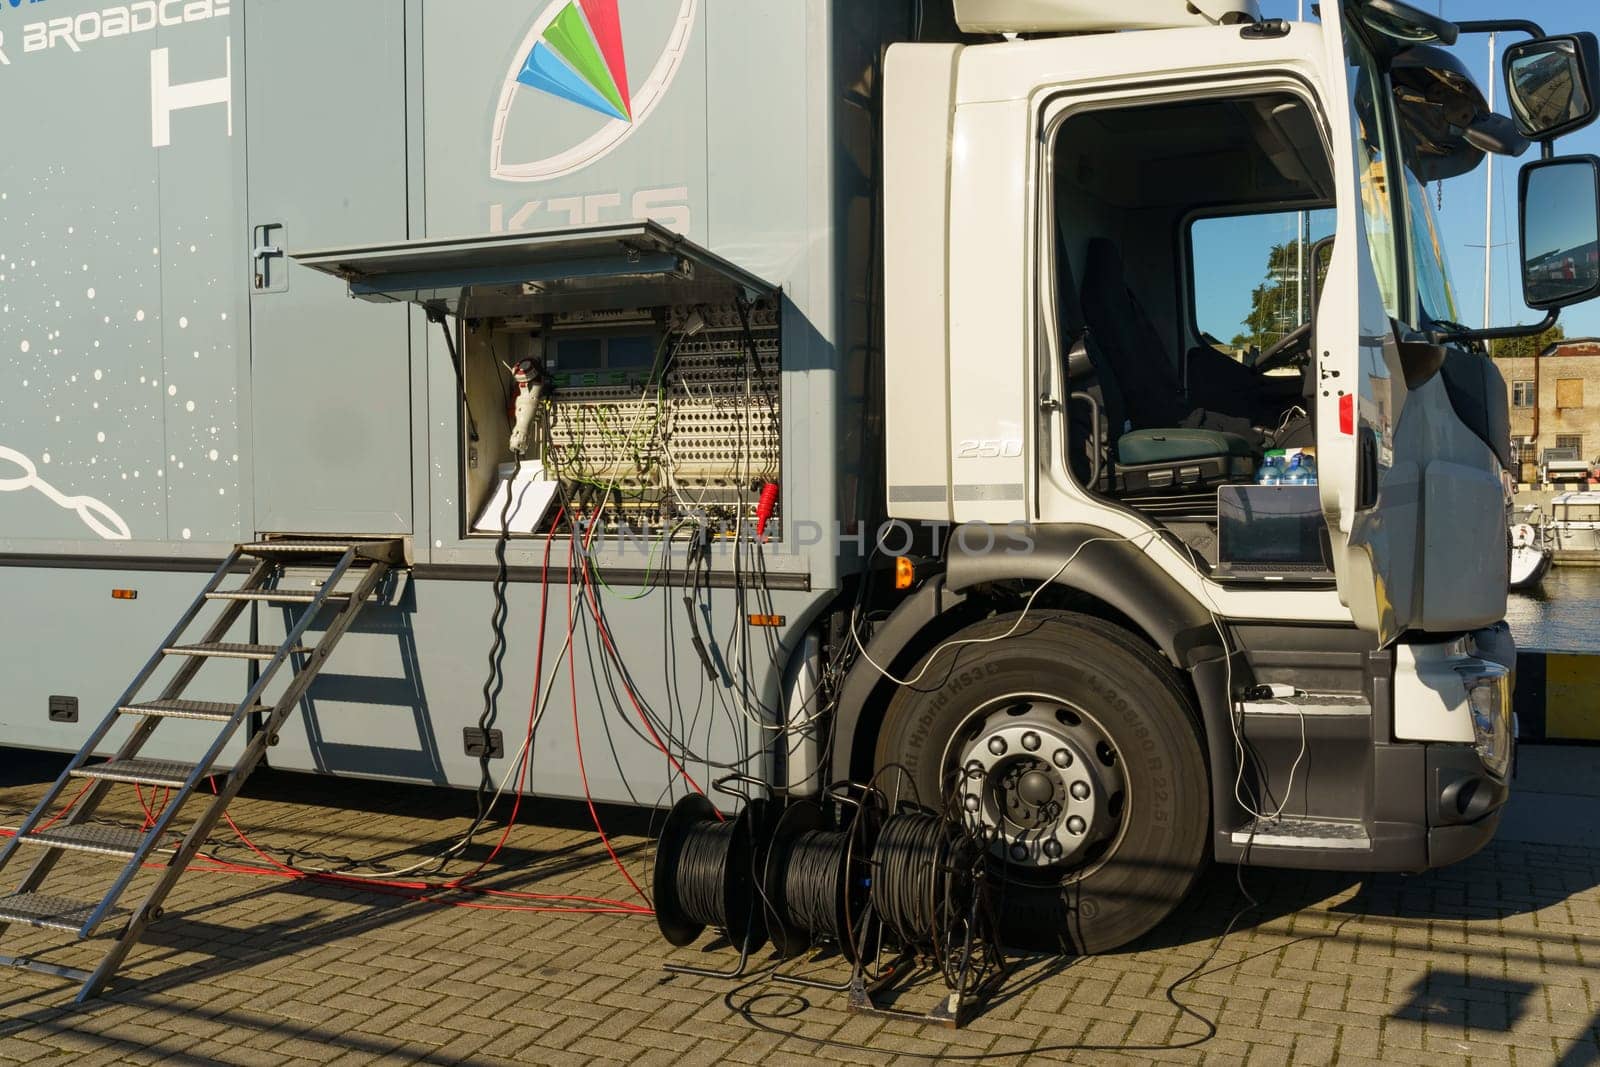 Klaipeda, Lithuania - August 11, 2023: A live broadcast truck with its side panel open, revealing screens and equipment for television production, standing ready for a live event coverage.